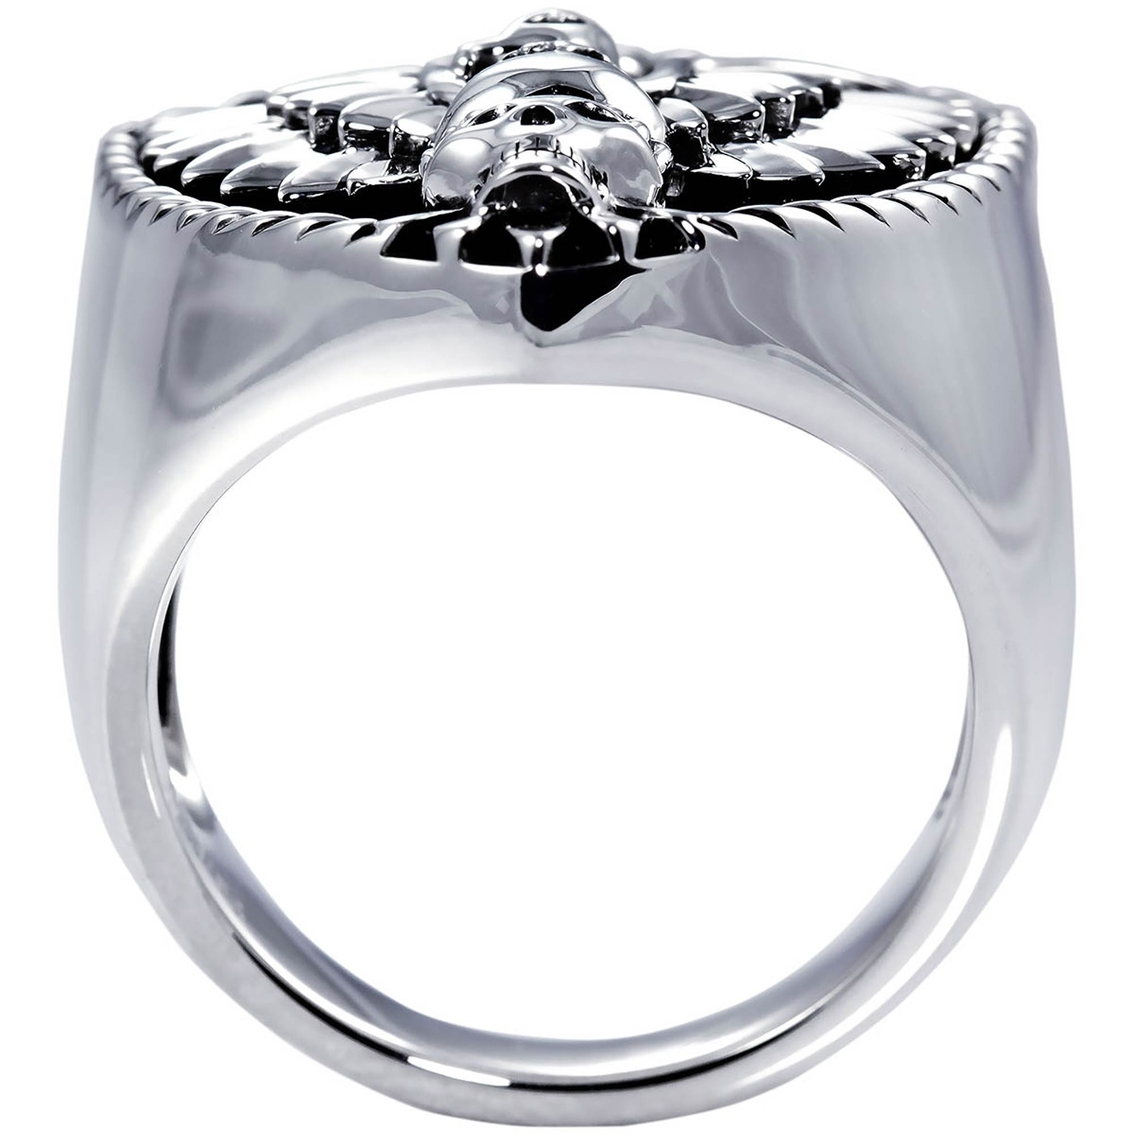 Men's Sterling Silver Eagle Shield Ring - Image 2 of 2